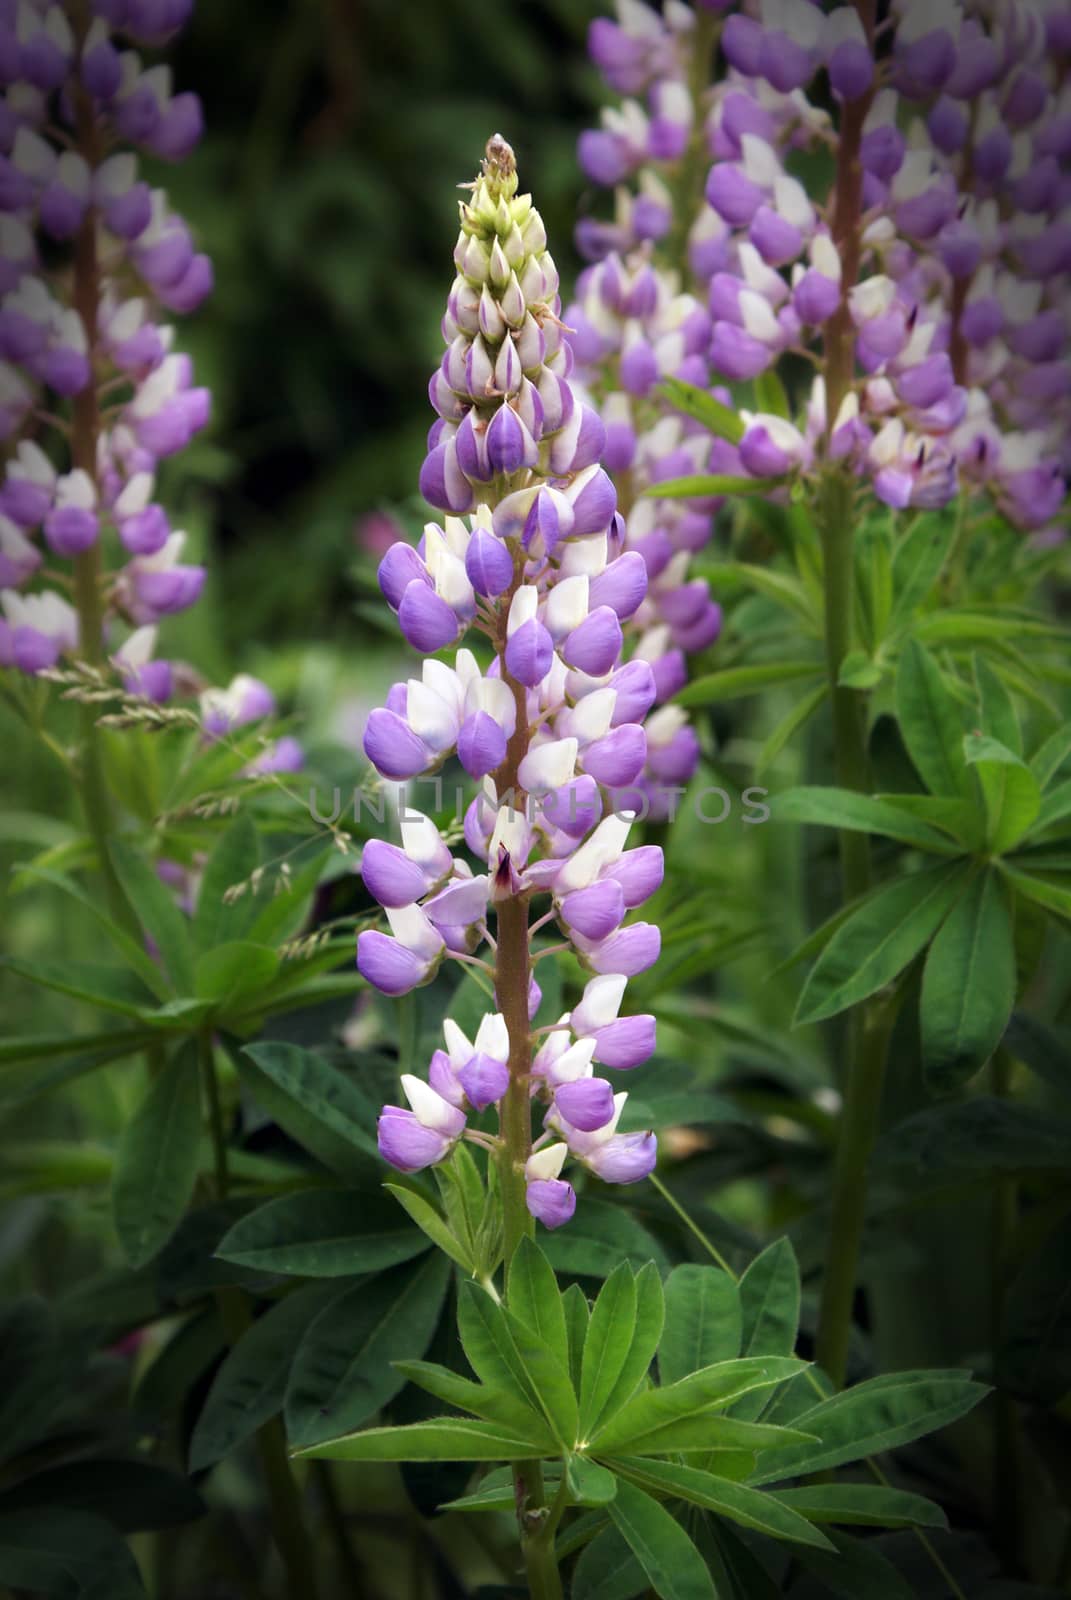 A stylish image of a bunch of purple lupin flowers in full bloom.